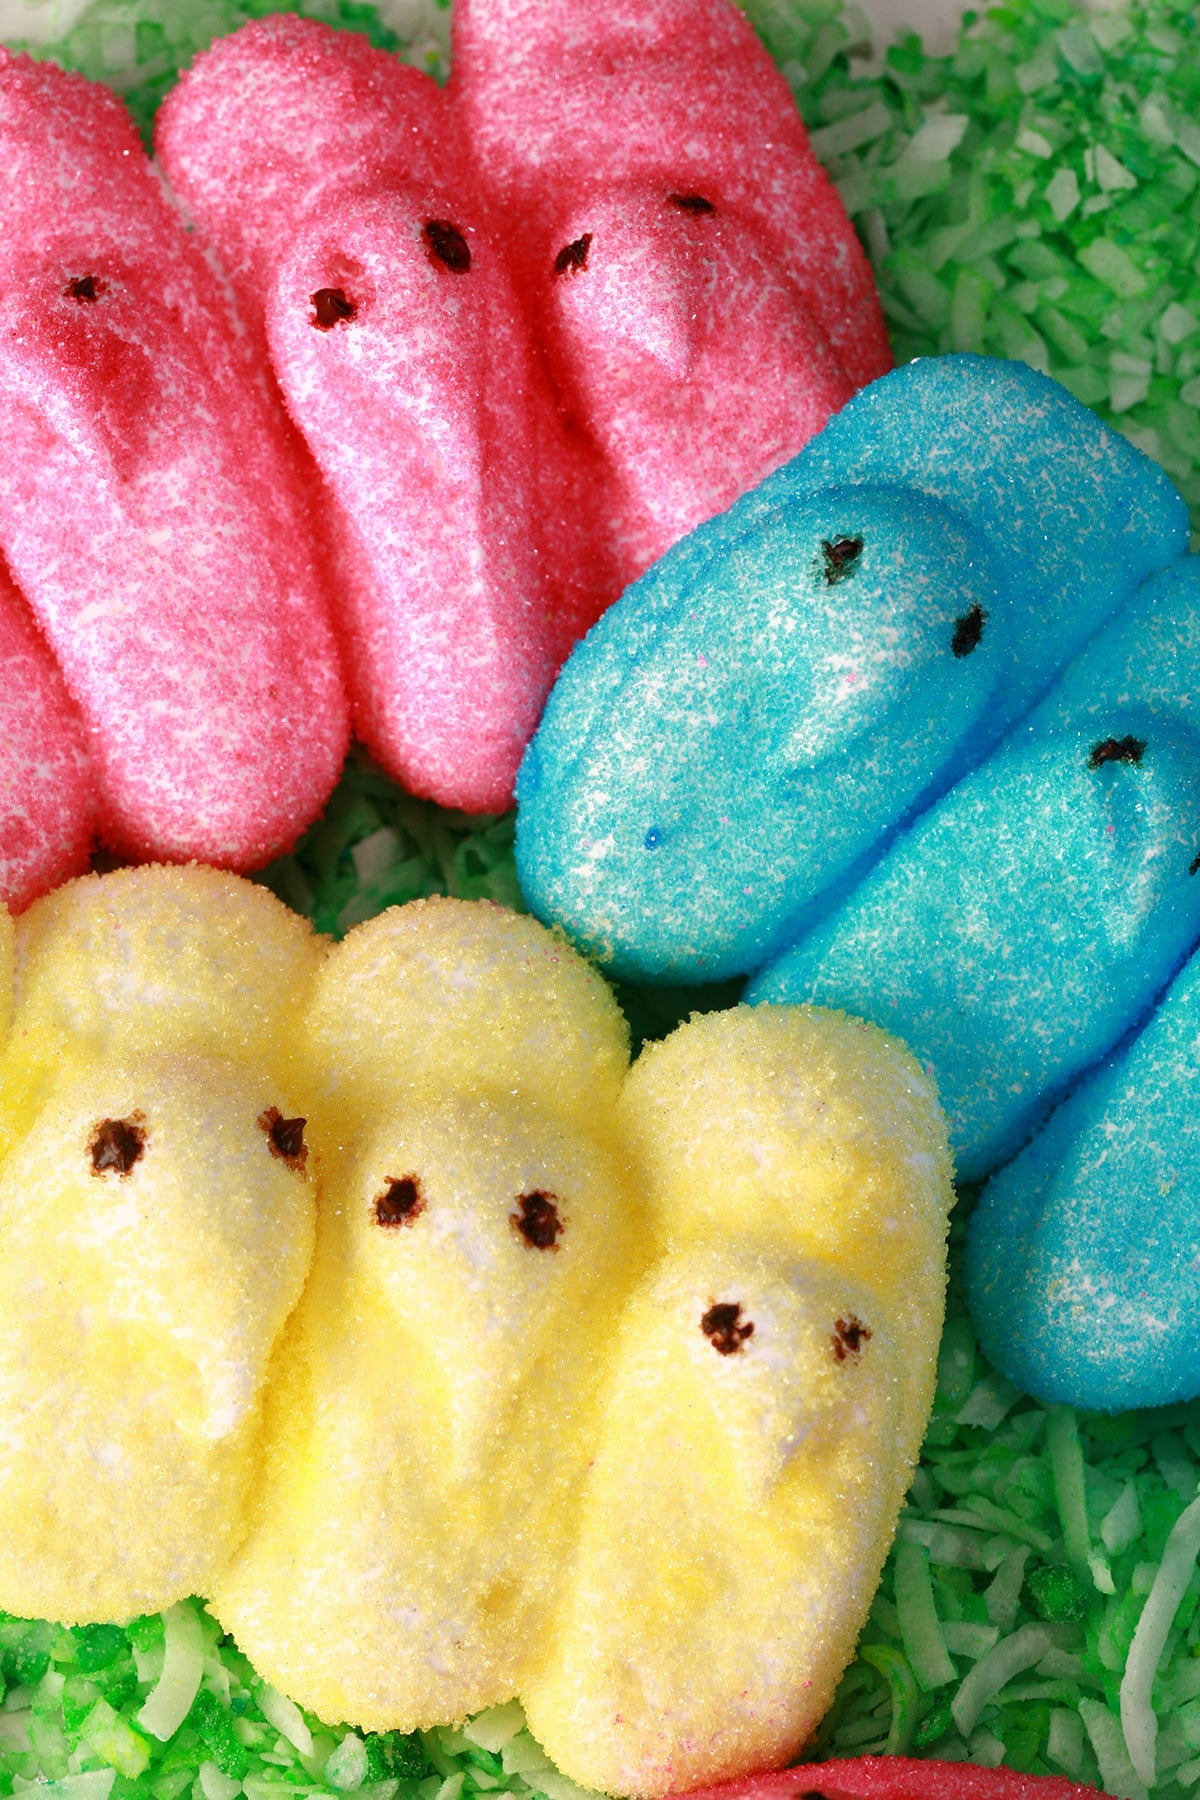 Pink, yellow, and blue chick shaped homemade peeps on a bed of green coconut.